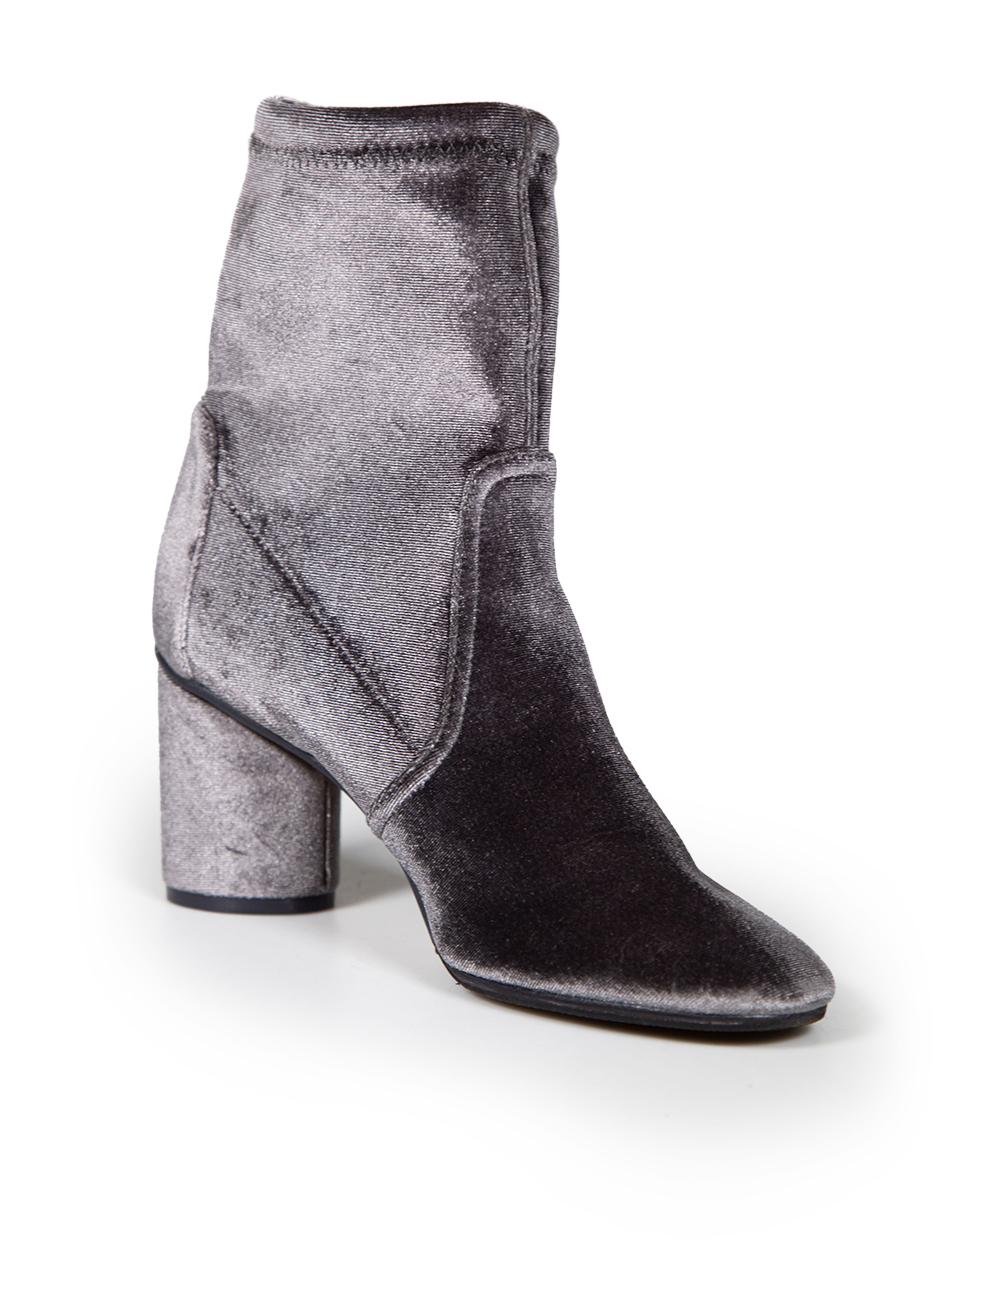 CONDITION is Good. Minor wear to boot is evident. Minimal wear to back heel where velvet fabric is coming away from heel on this used Stuart Weitzman designer resale item. These boots have been resoled.
 
 
 
 Details
 
 
 Grey
 
 Velvet
 
 Sock